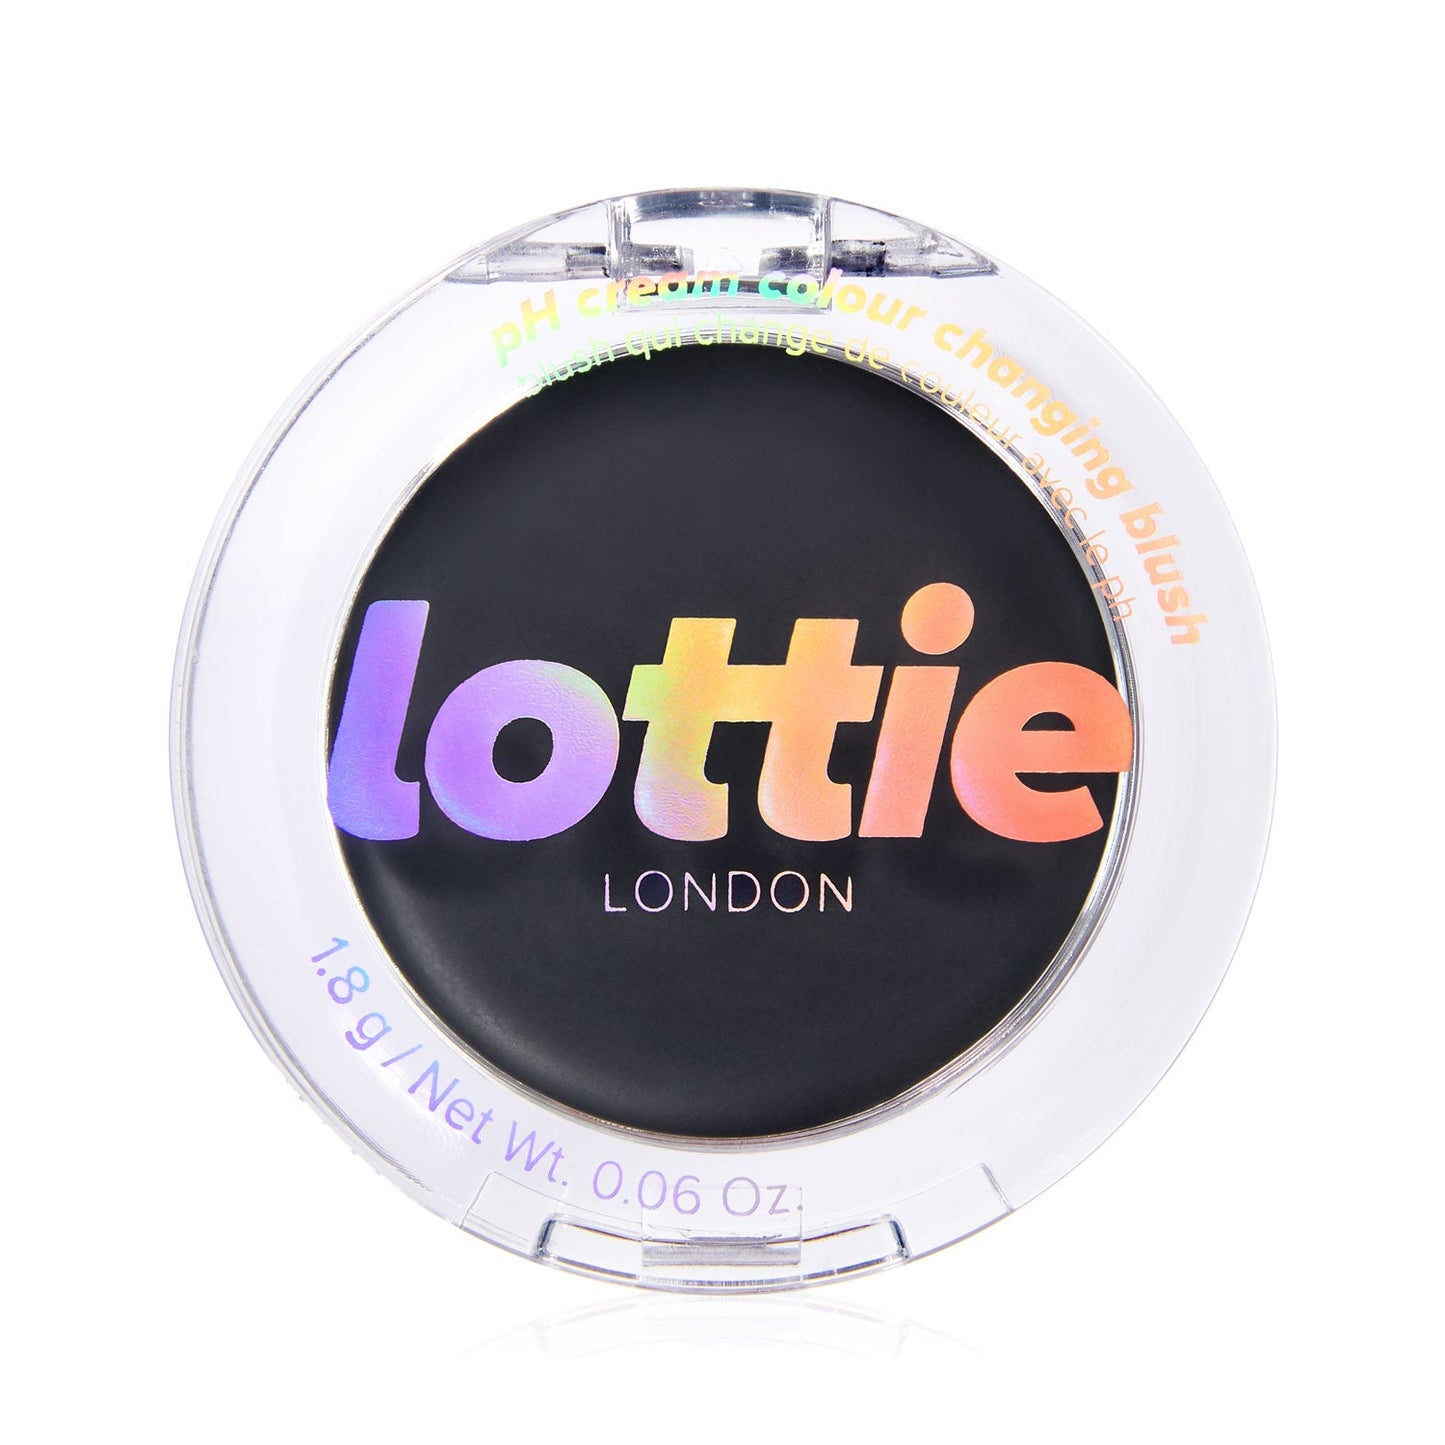 Lottie Colour Changing Cream Blush, Onyx, Black to Berry Pink - 1.8g